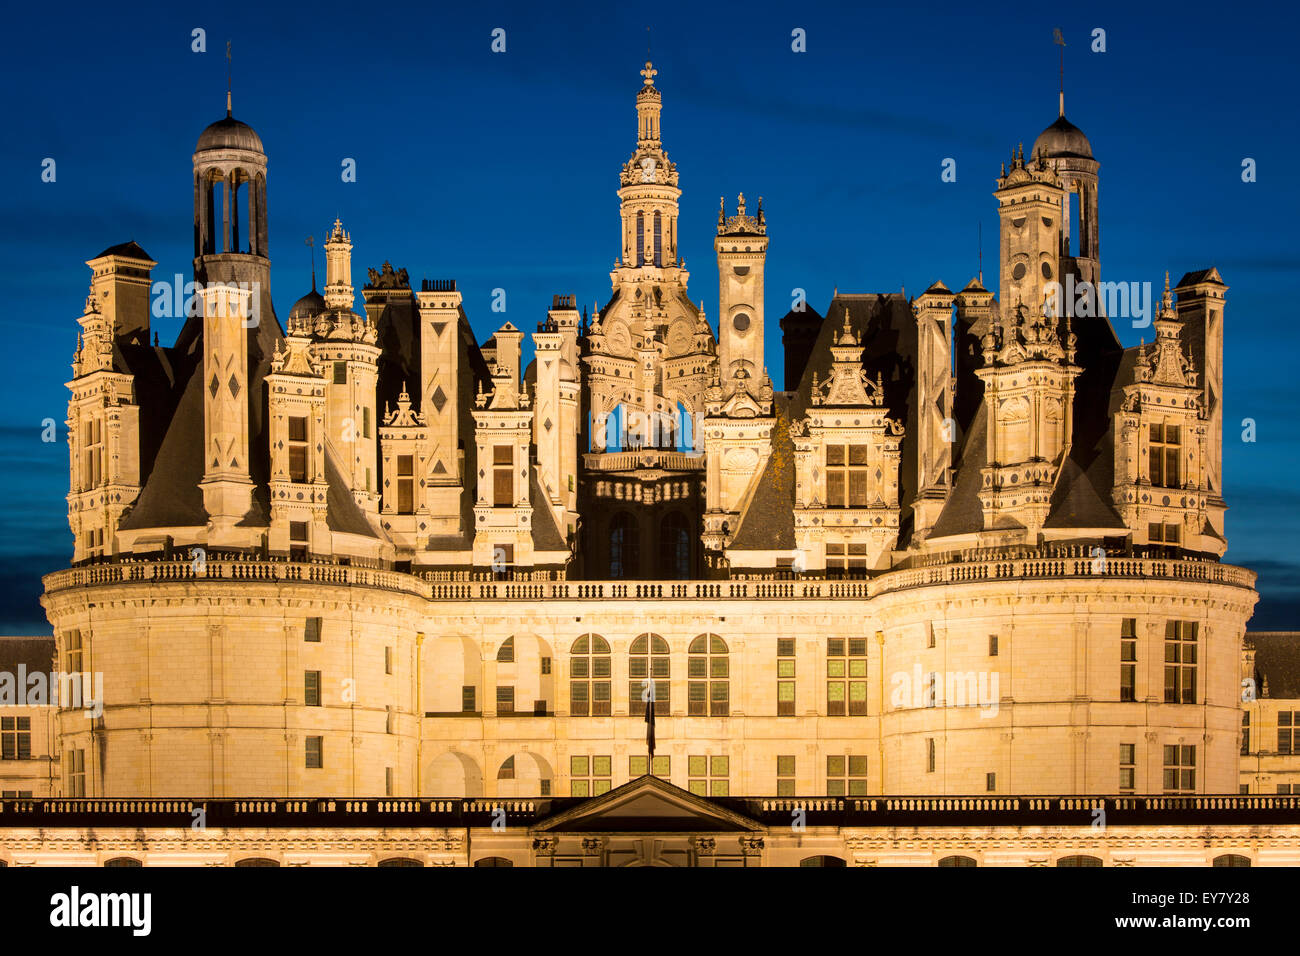 Château de Chambord: 440 Rooms of Royal Opulence, Travel